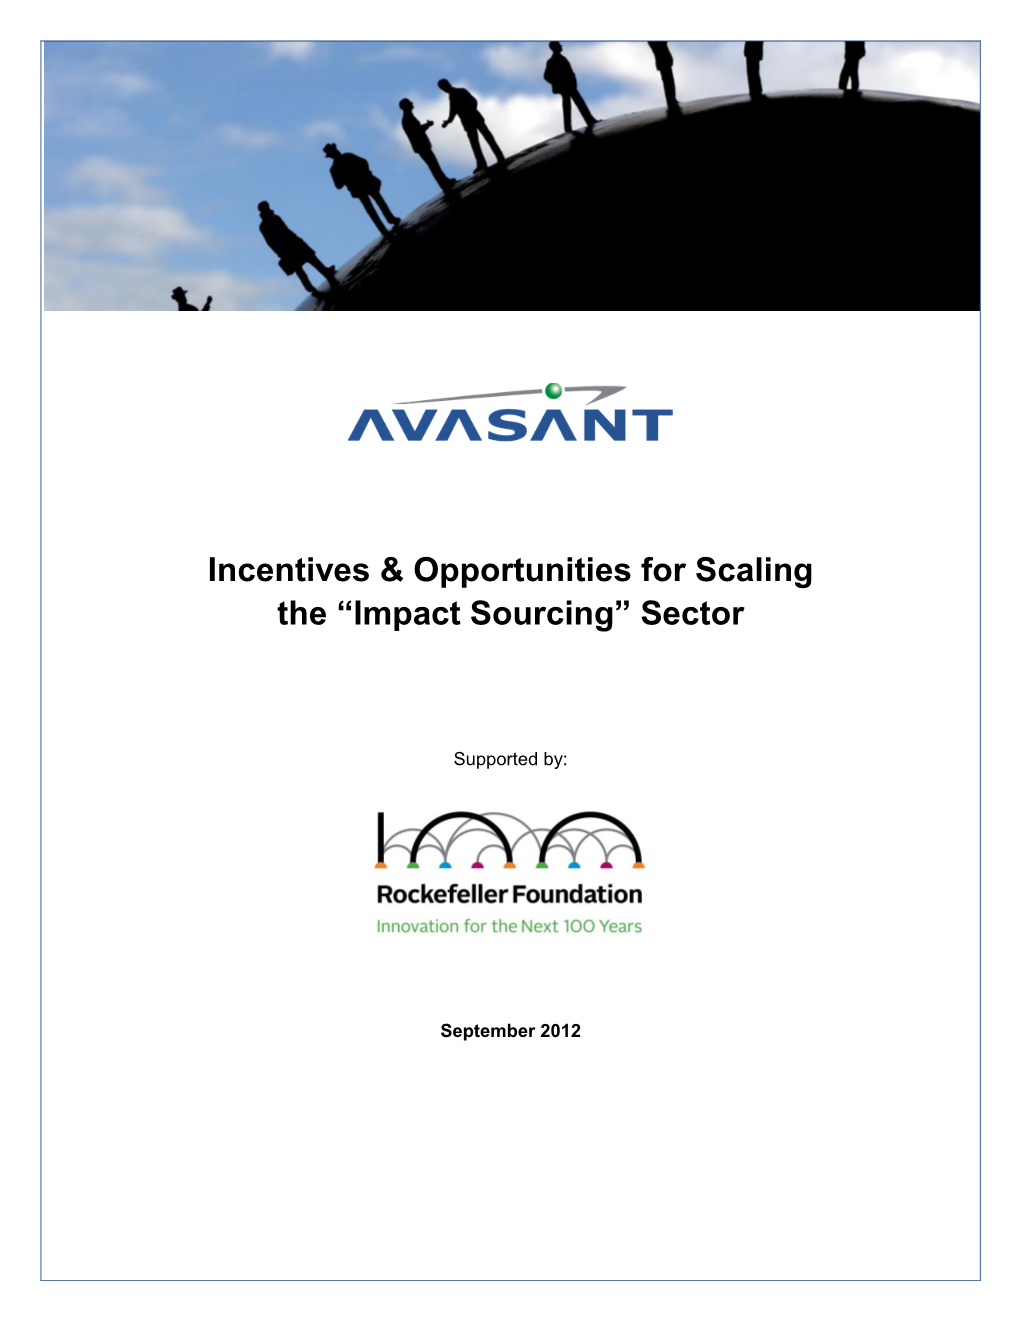 Incentives & Opportunities for Scaling “Impact Sourcing” Sector